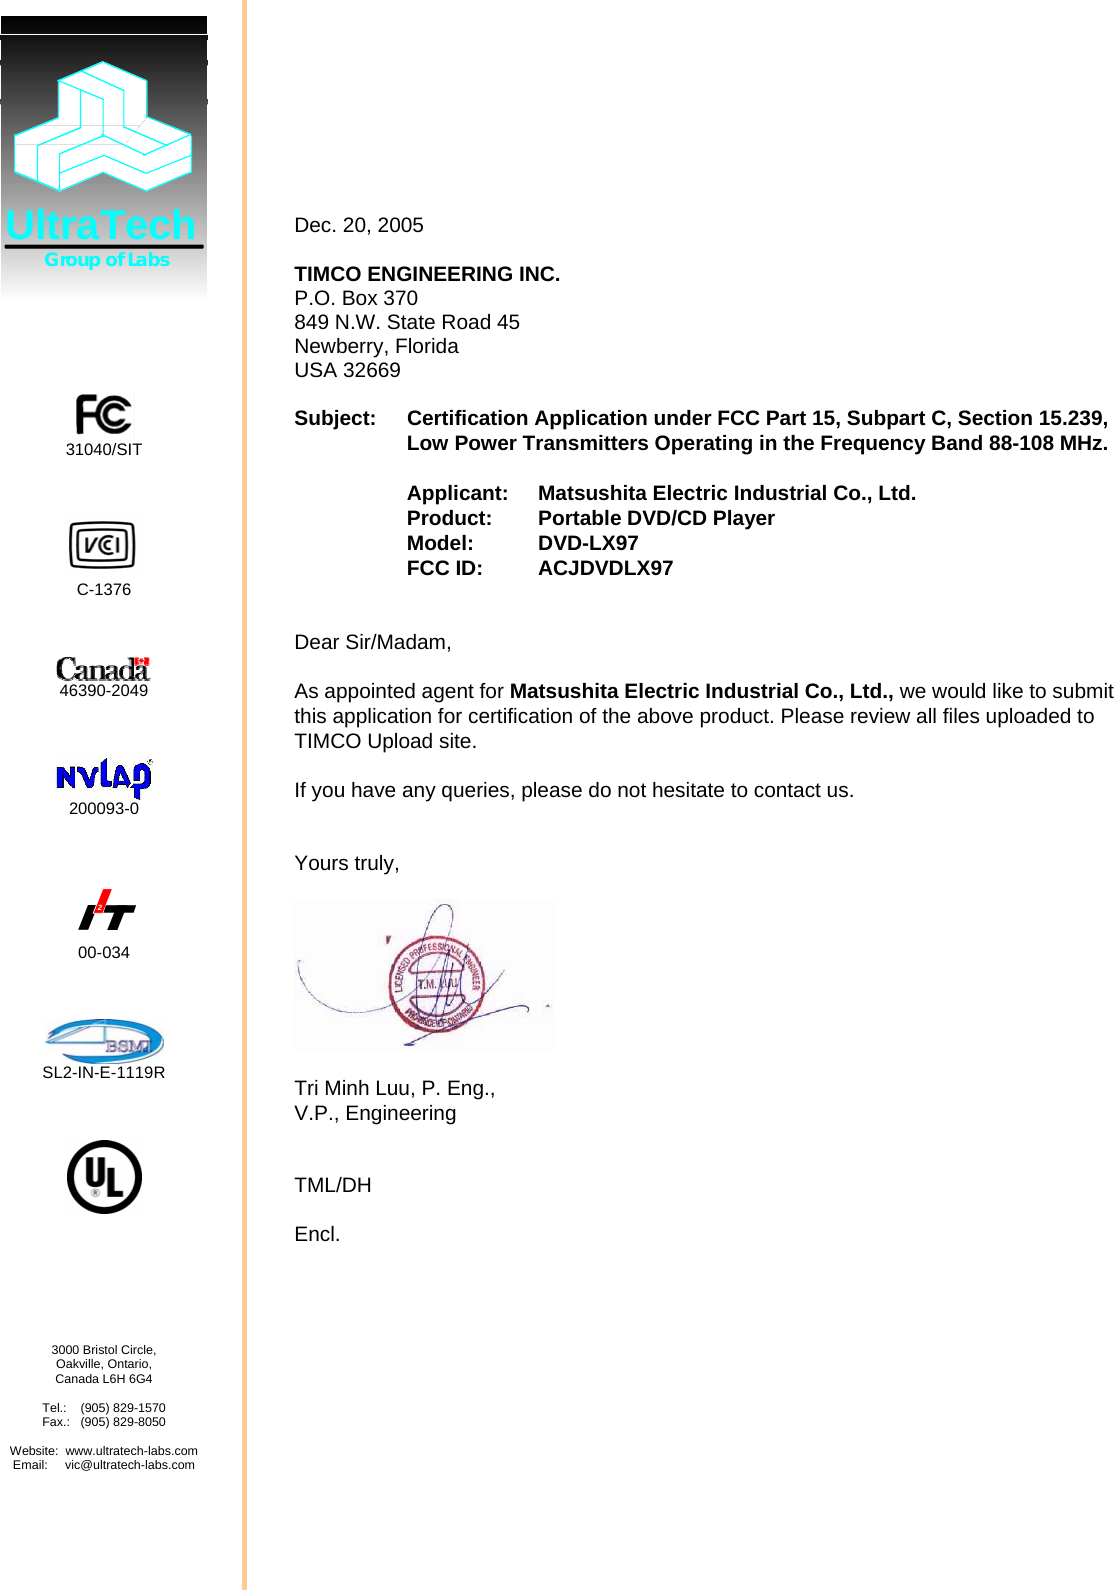   Dec. 20, 2005  TIMCO ENGINEERING INC. P.O. Box 370 849 N.W. State Road 45 Newberry, Florida USA 32669  Subject:  Certification Application under FCC Part 15, Subpart C, Section 15.239, Low Power Transmitters Operating in the Frequency Band 88-108 MHz.  Applicant:  Matsushita Electric Industrial Co., Ltd.   Product: Portable DVD/CD Player Model: DVD-LX97 FCC ID:  ACJDVDLX97  Dear Sir/Madam,  As appointed agent for Matsushita Electric Industrial Co., Ltd., we would like to submit this application for certification of the above product. Please review all files uploaded to TIMCO Upload site.  If you have any queries, please do not hesitate to contact us.   Yours truly,    Tri Minh Luu, P. Eng., V.P., Engineering   TML/DH  Encl.   UltraTech       Group of Labs      31040/SIT     C-1376     46390-2049     200093-0    2 00-034     SL2-IN-E-1119R           3000 Bristol Circle, Oakville, Ontario, Canada L6H 6G4  Tel.:    (905) 829-1570 Fax.:   (905) 829-8050  Website:  www.ultratech-labs.com Email:     vic@ultratech-labs.com      